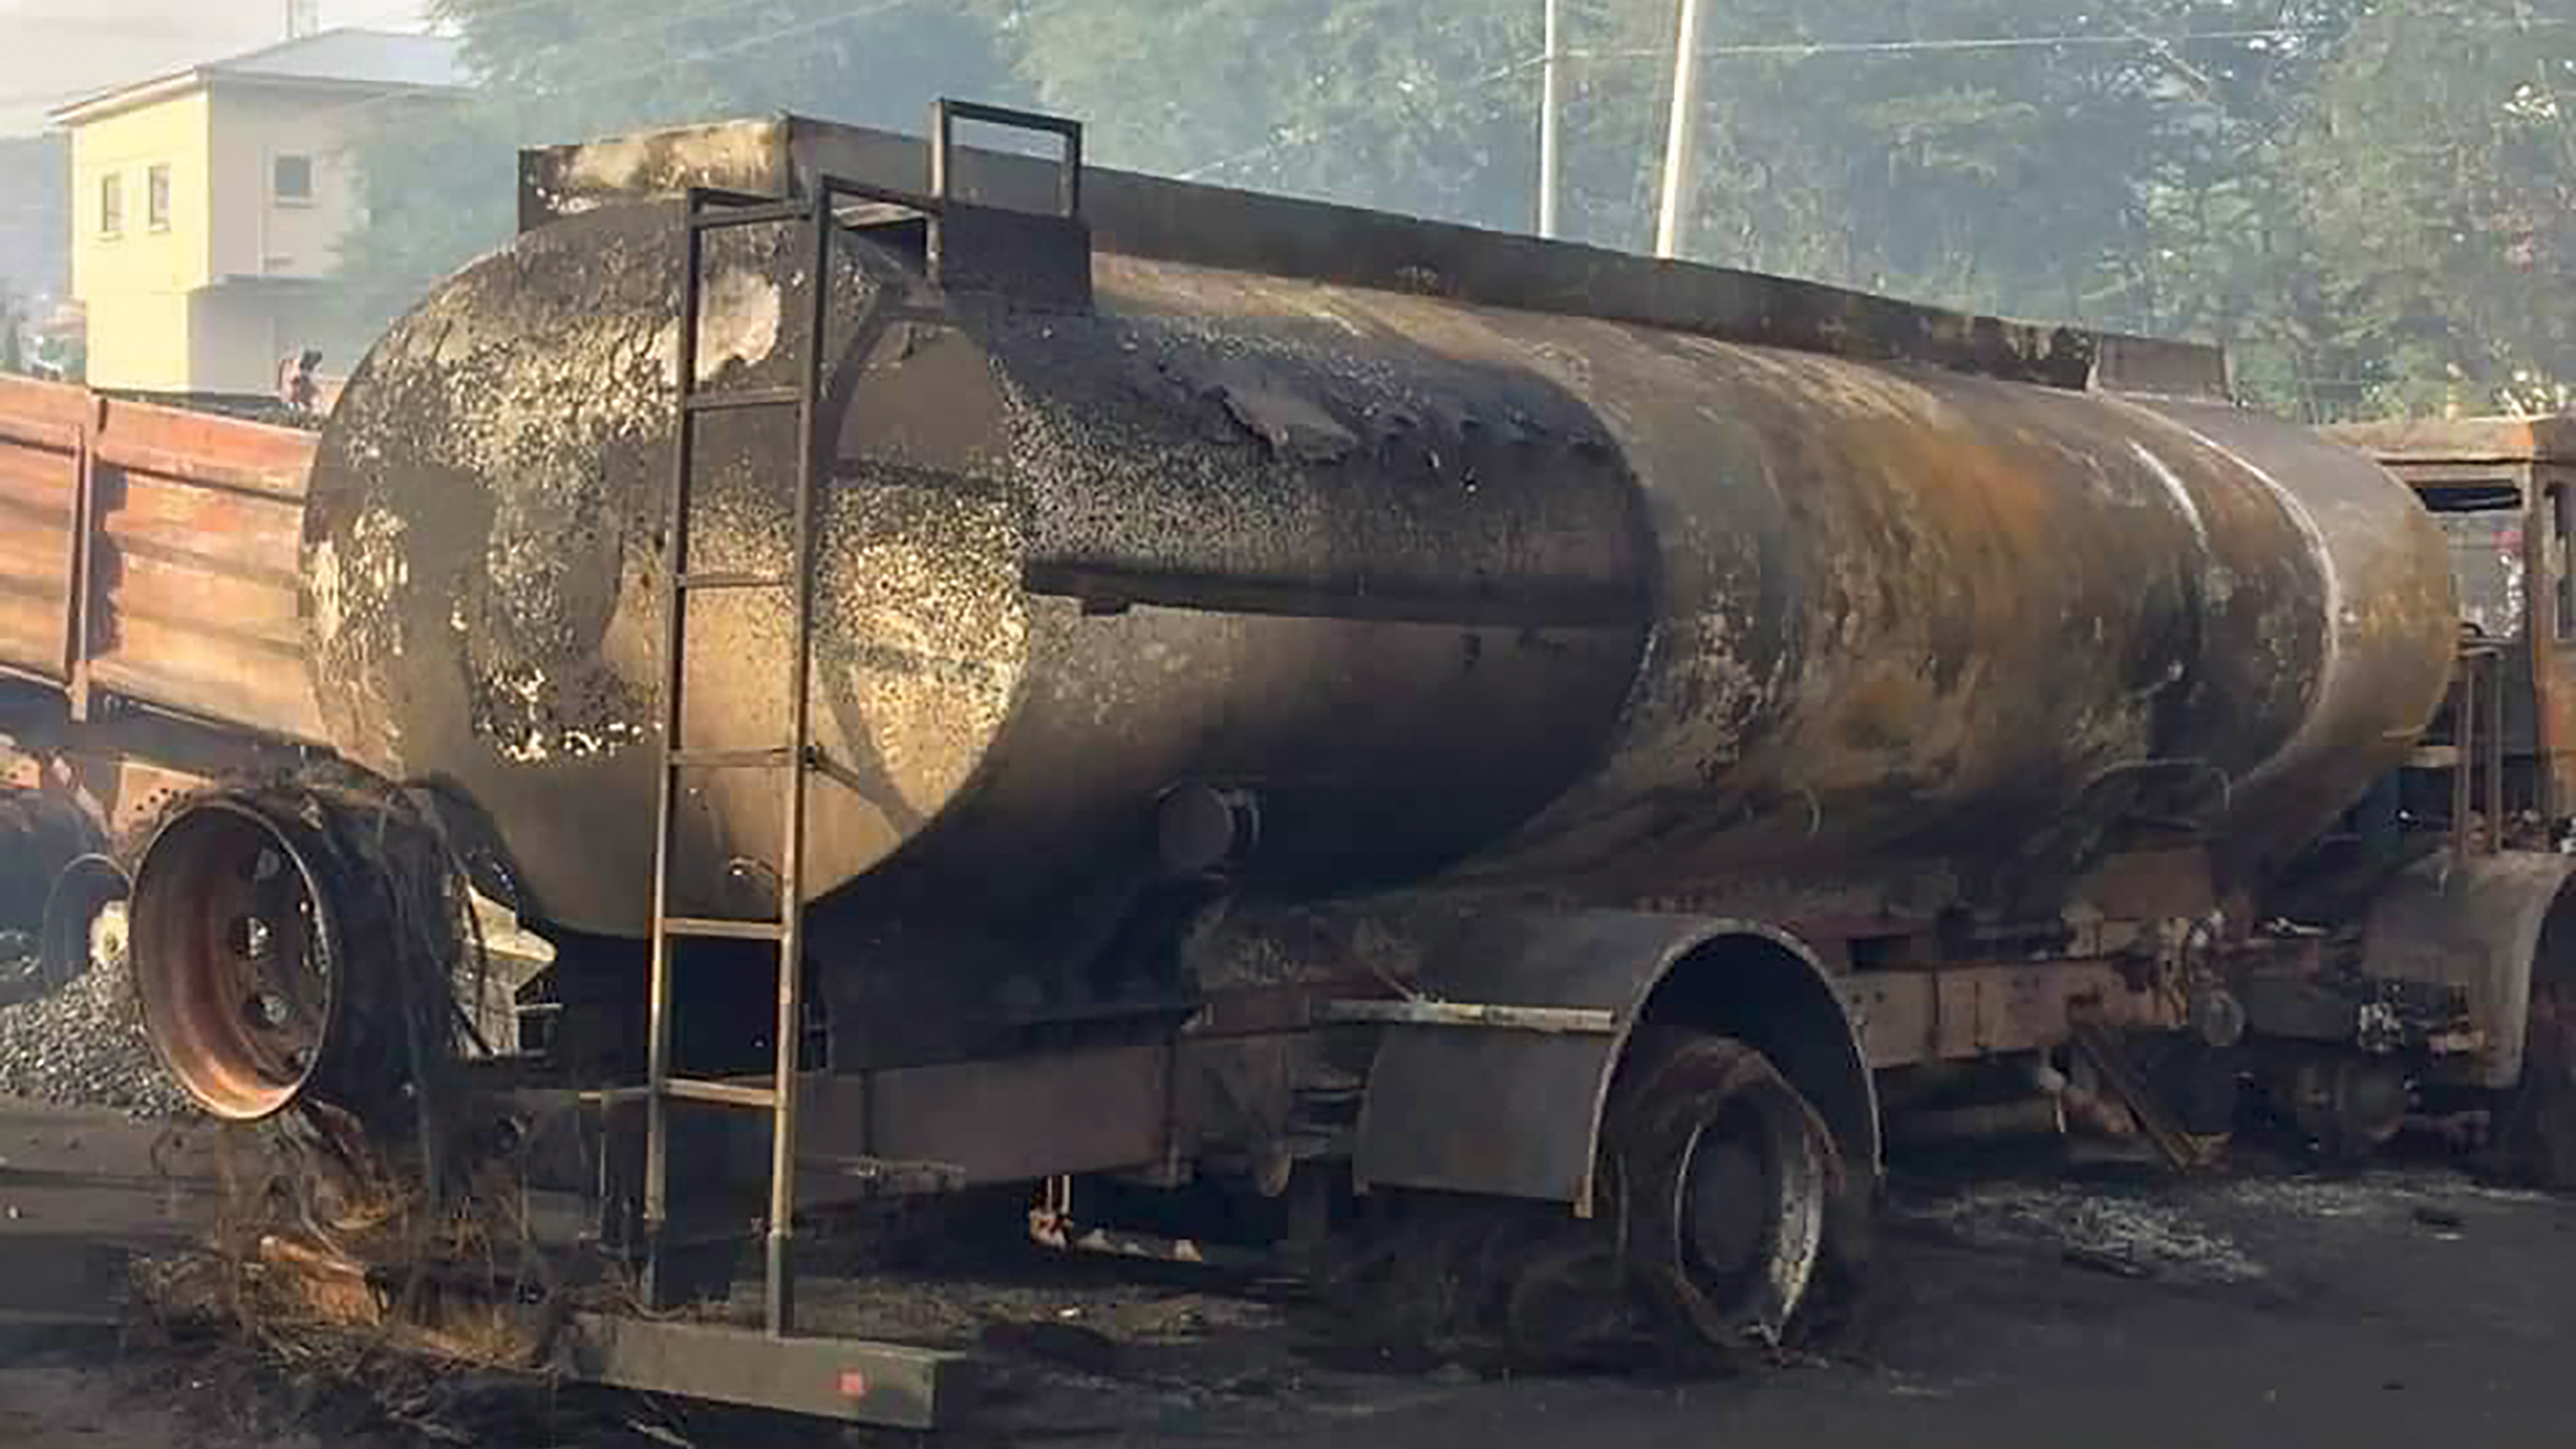 Authorities say at least eighty people are dead and others critically wounded after an oil tanker exploded near Sierra Leone's capital.